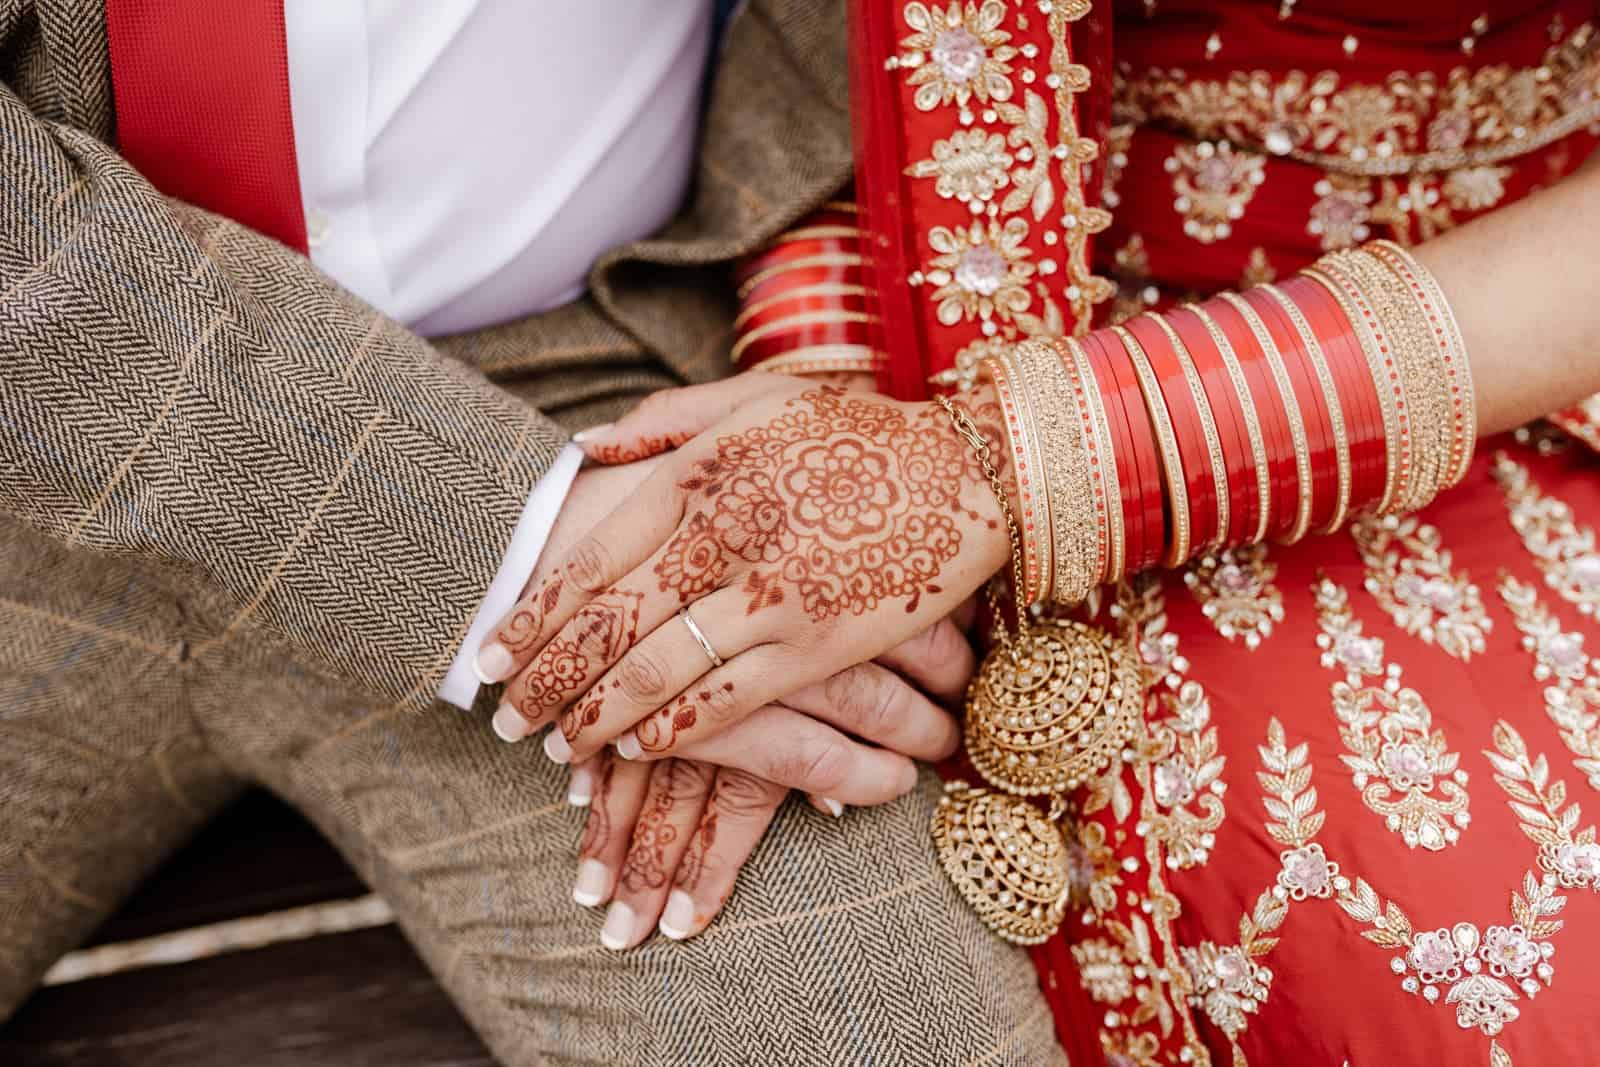 Oakley hall asian wedding with henna on hands